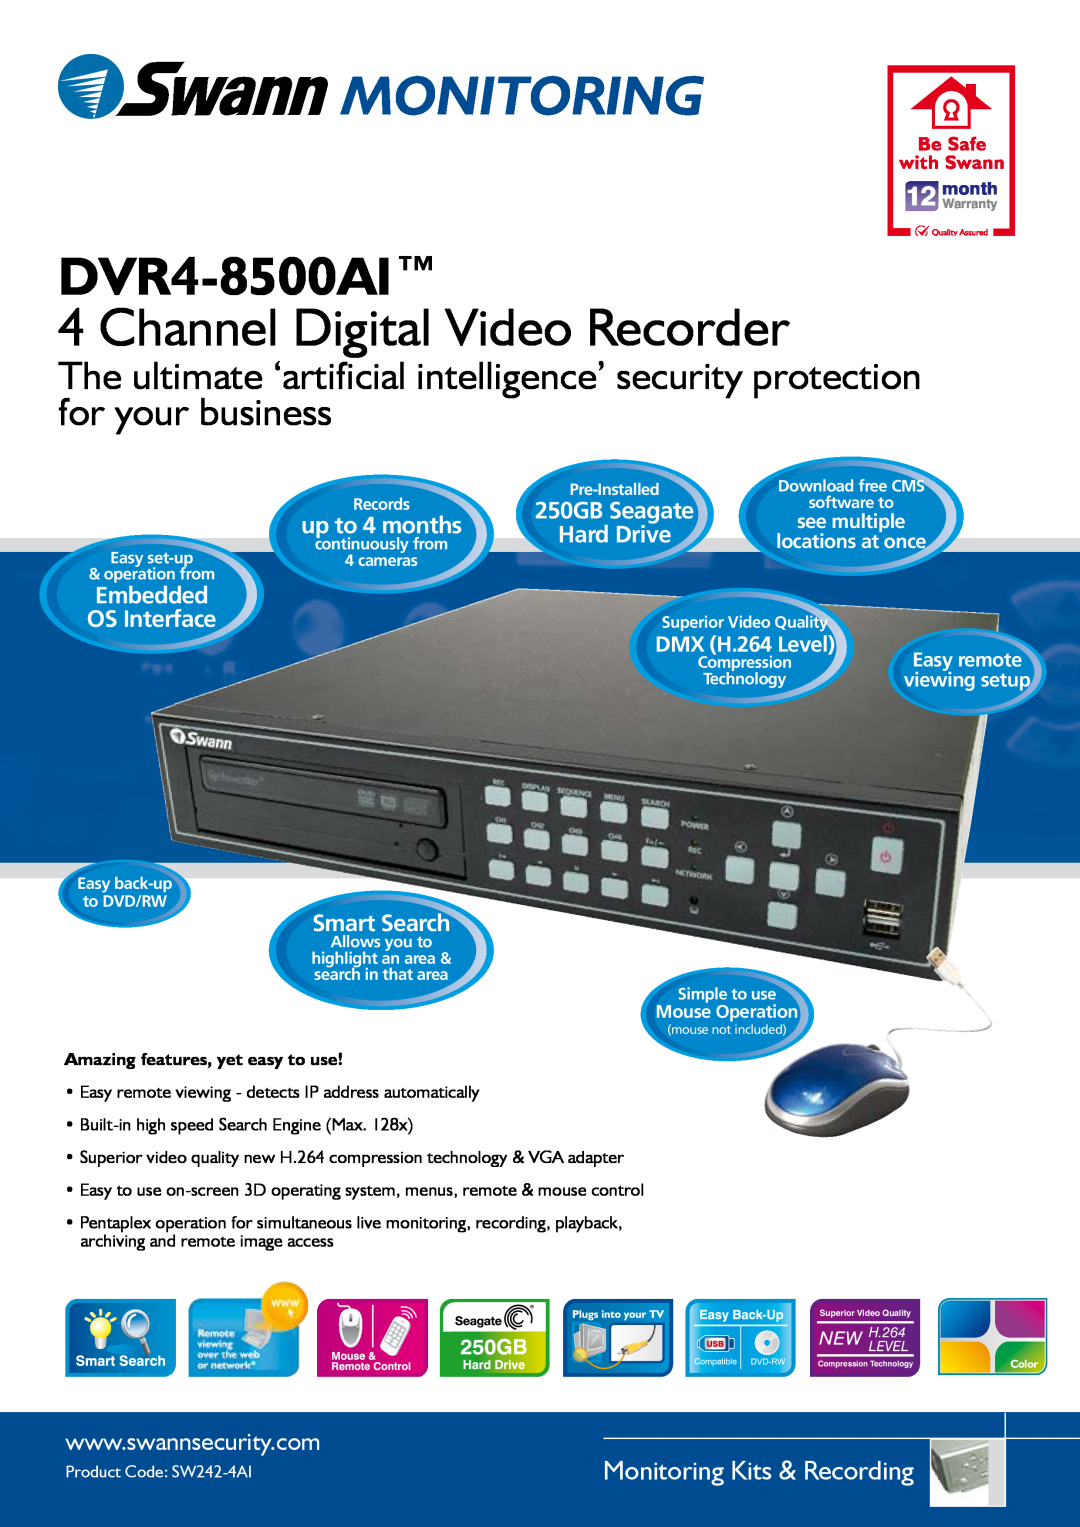 Swann DVR4-8500AI warranty Channel Digital Video Recorder, Monitoring Kits & Recording, up to 4 months, Embedded 